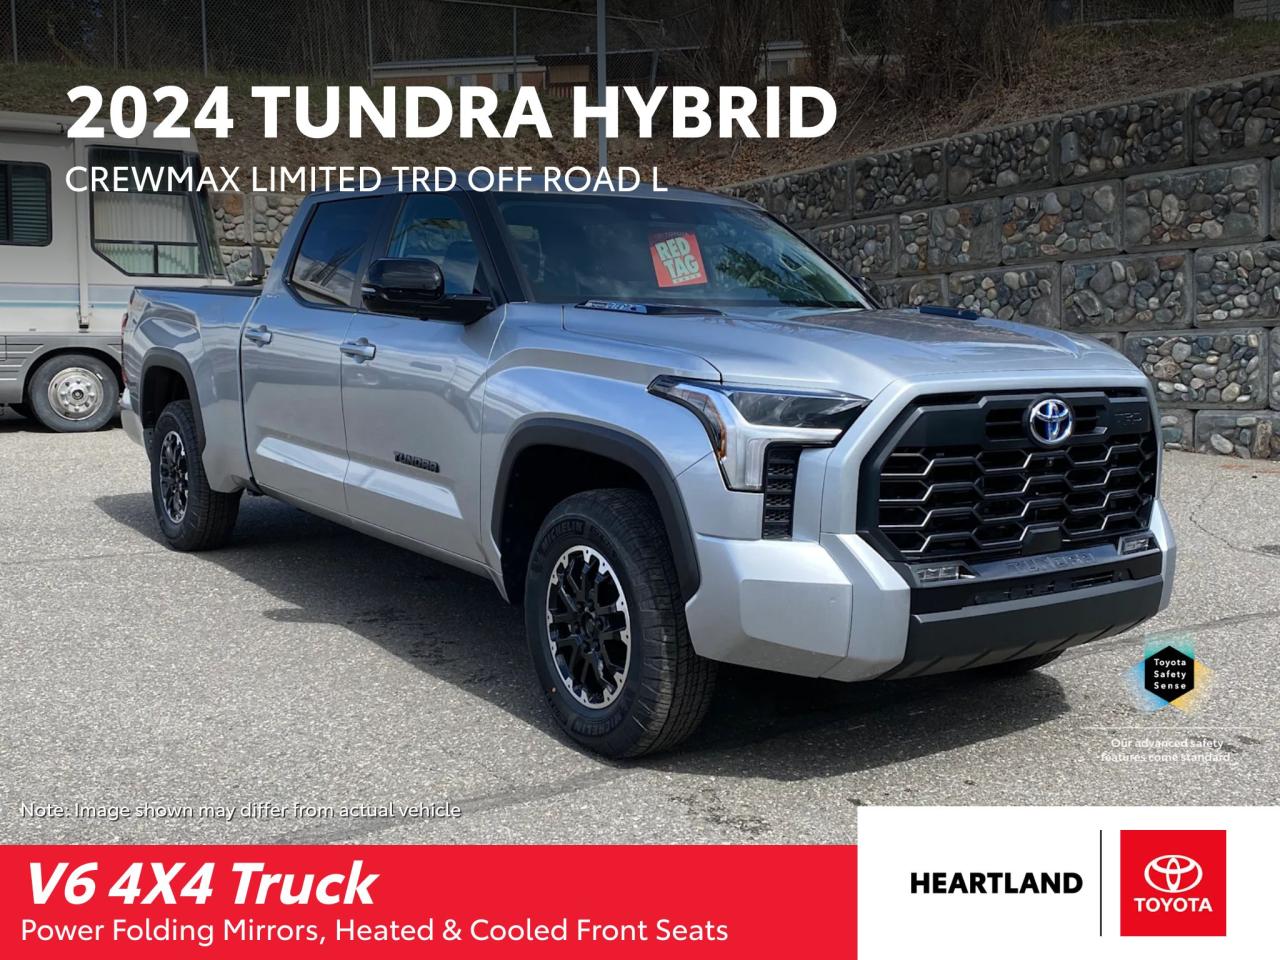 2024 Toyota Tundra Crewmax Limited L TRD Off Road Photo0